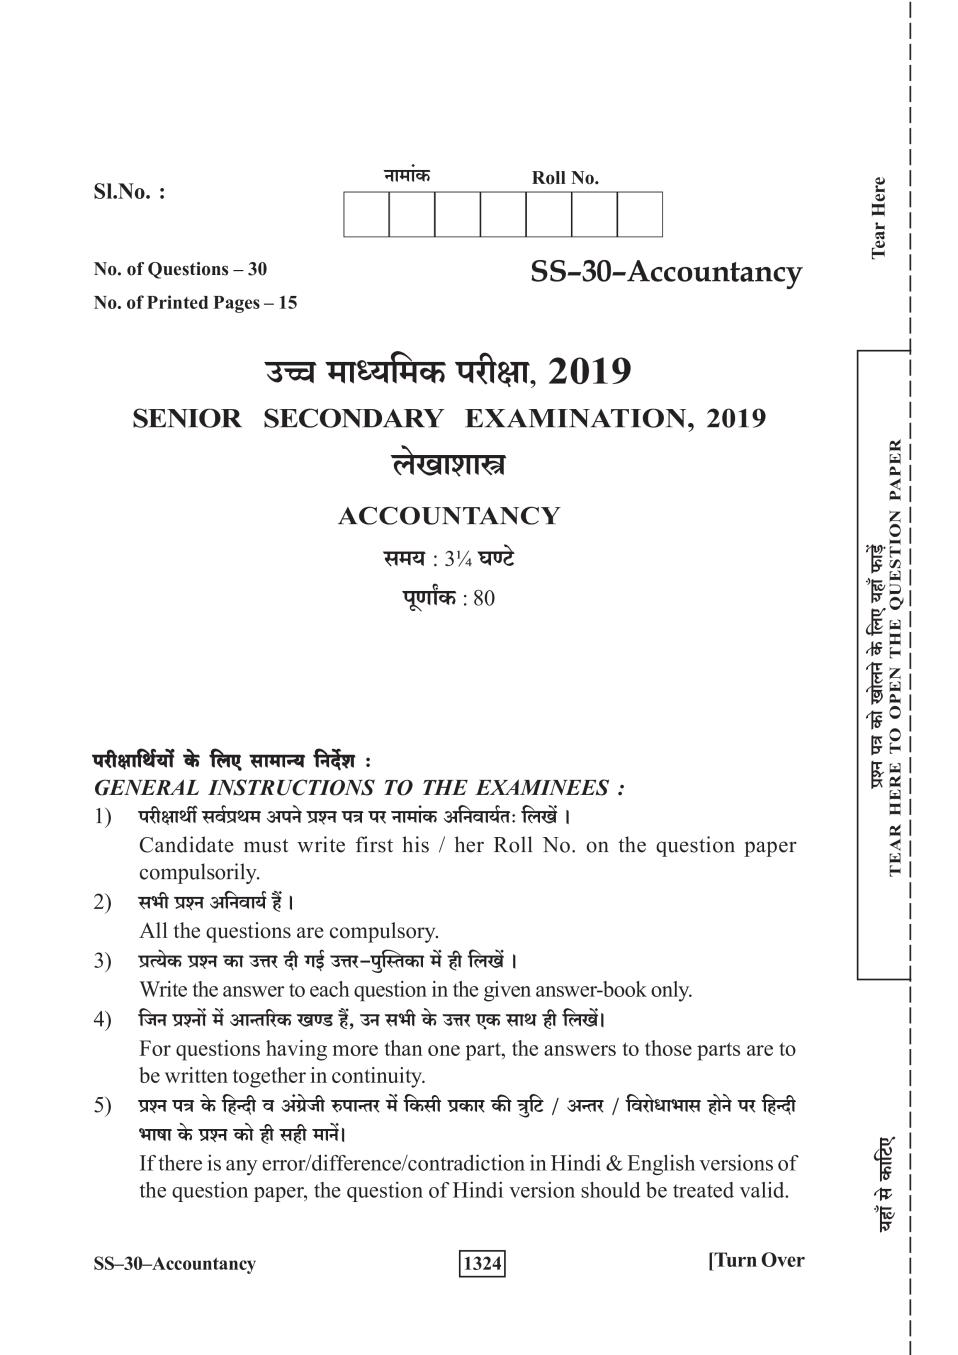 Rajasthan Board 12th Class Accountancy Question Paper 2019 - Page 1